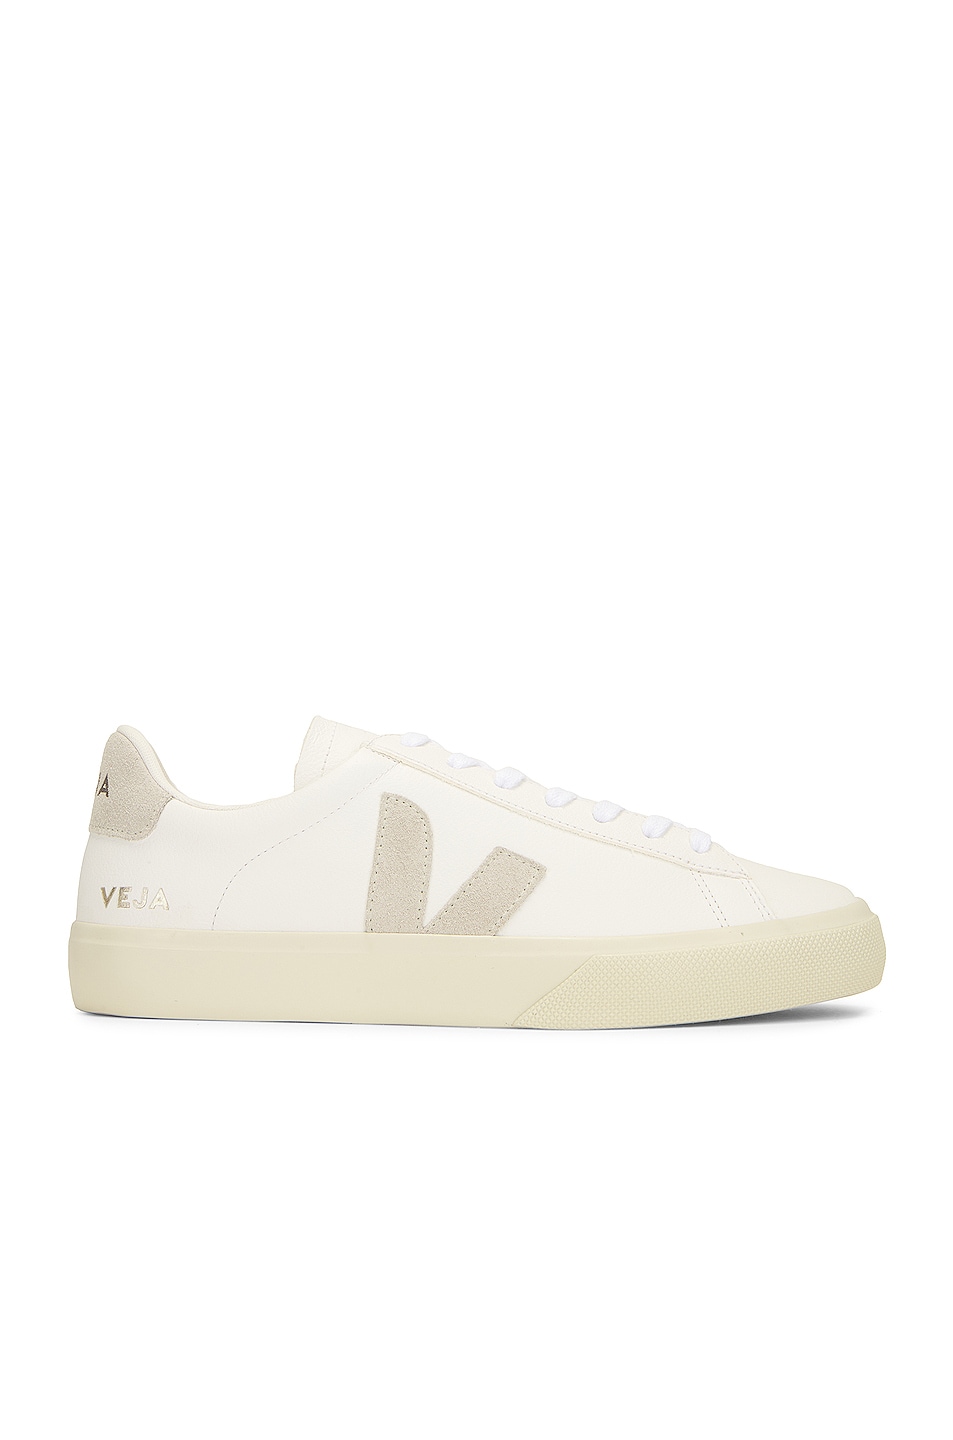 Image 1 of Veja Campo Sneaker in Extra White & Natural Suede